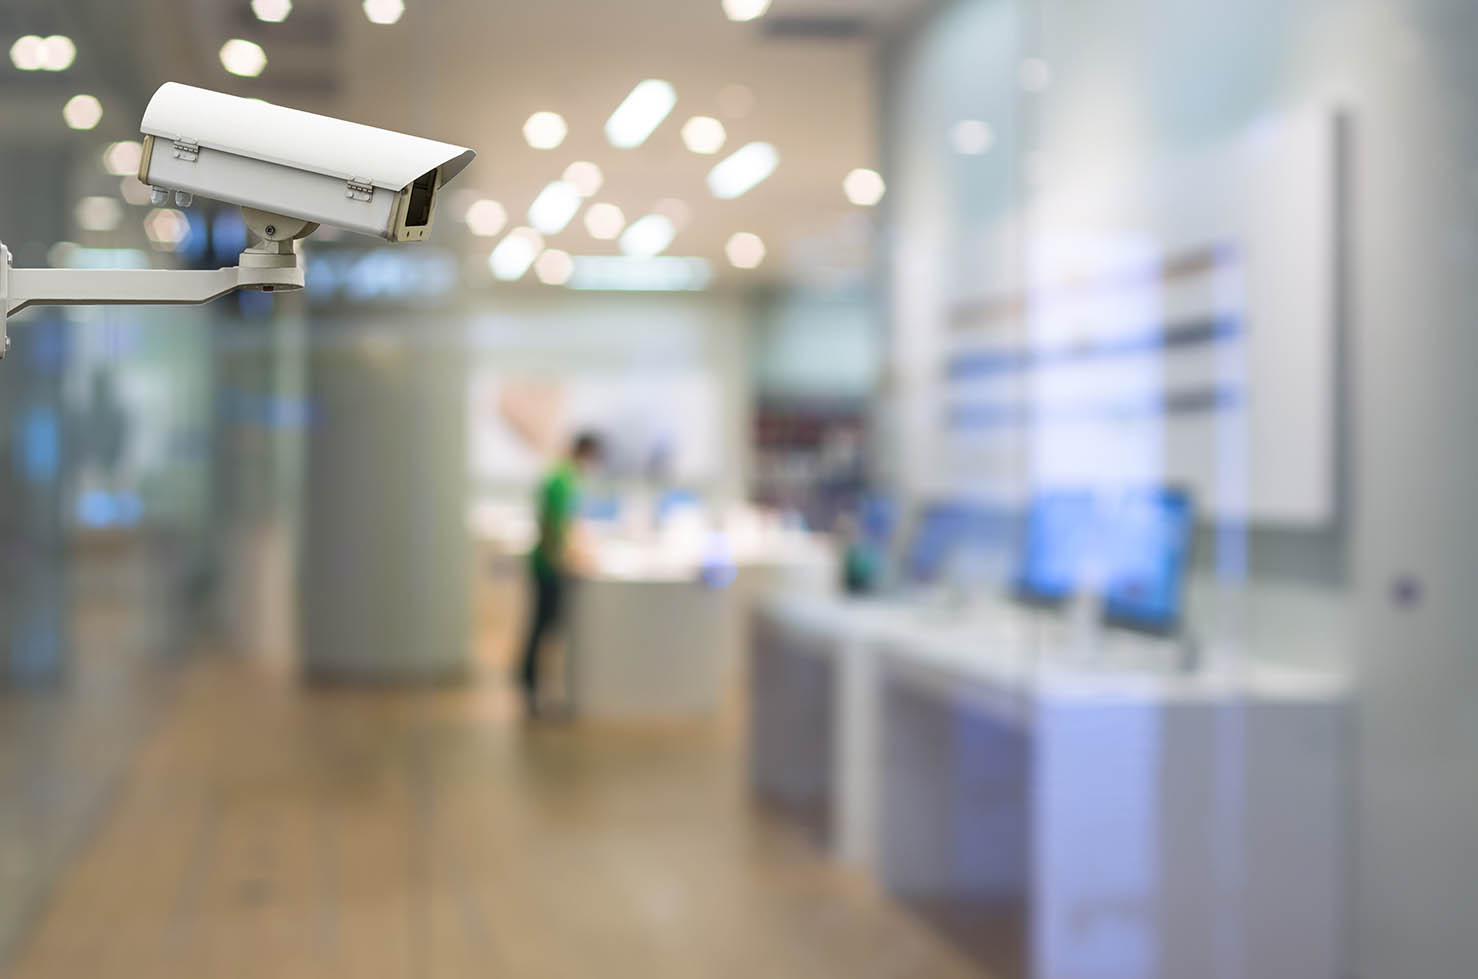 cctv-security-camera-on-monitor-the-abstract-store